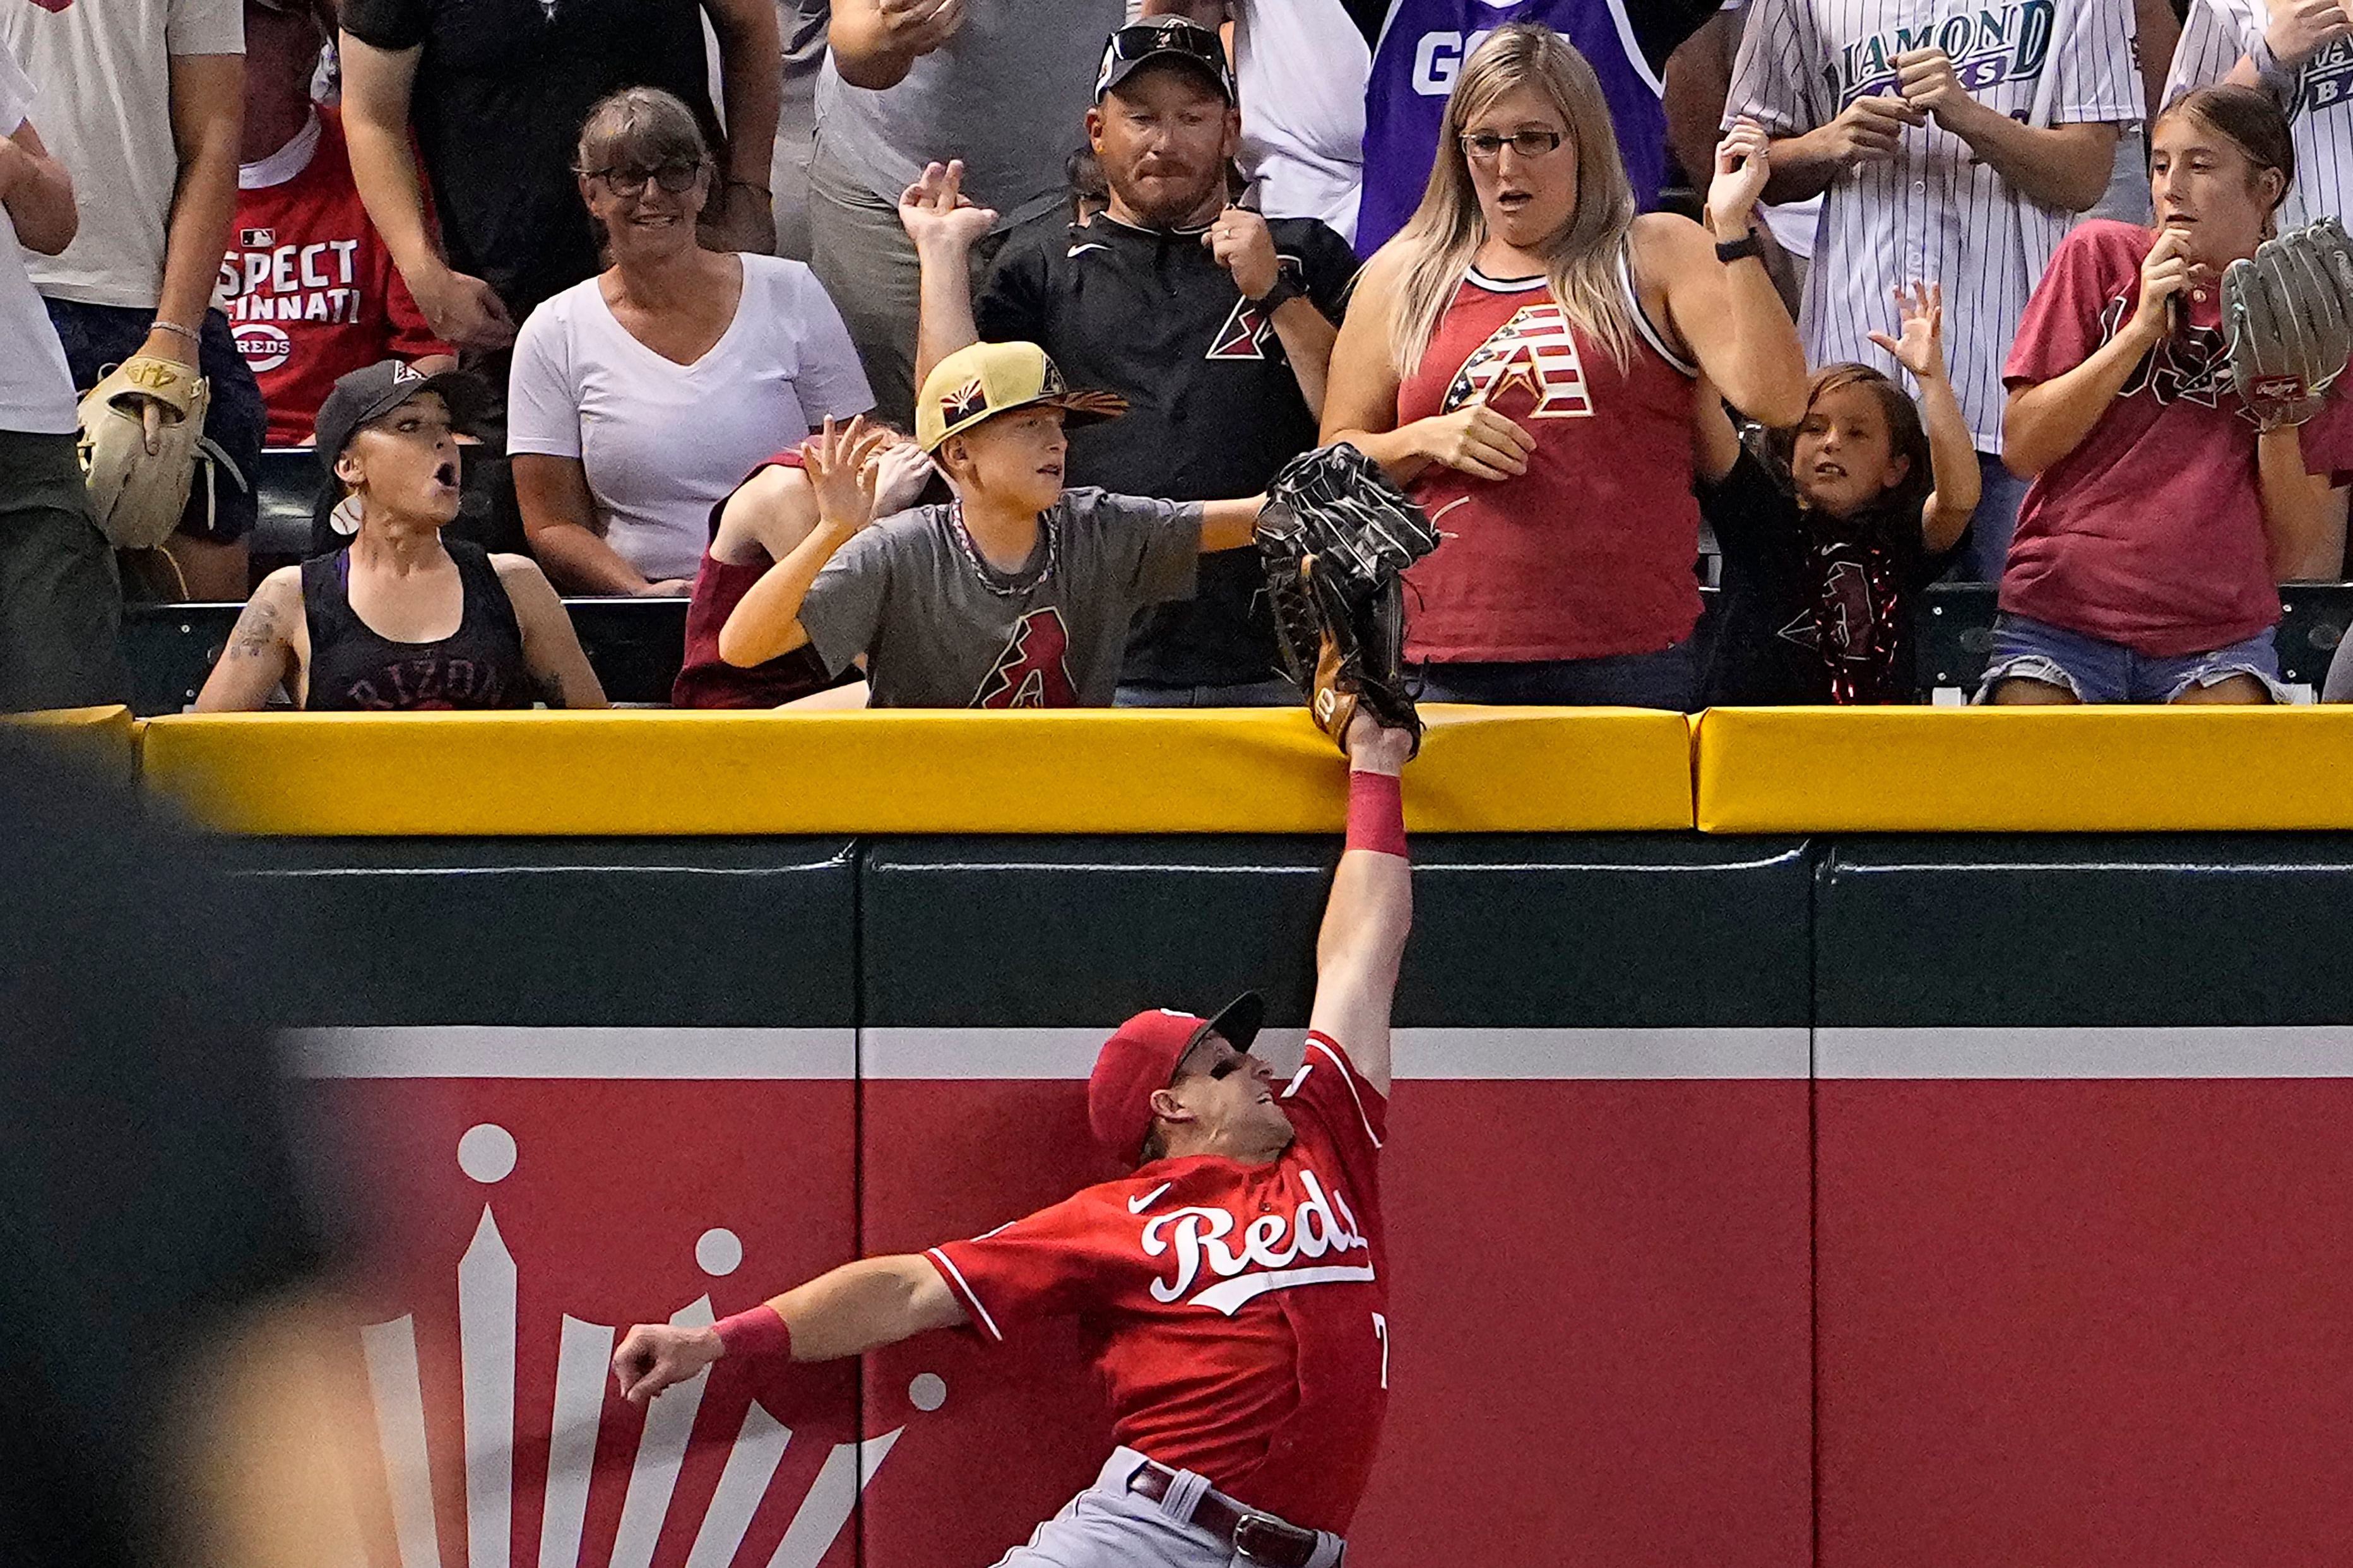 Tommy Pham ignores salty banter with Padres fans, leads DBacks to win